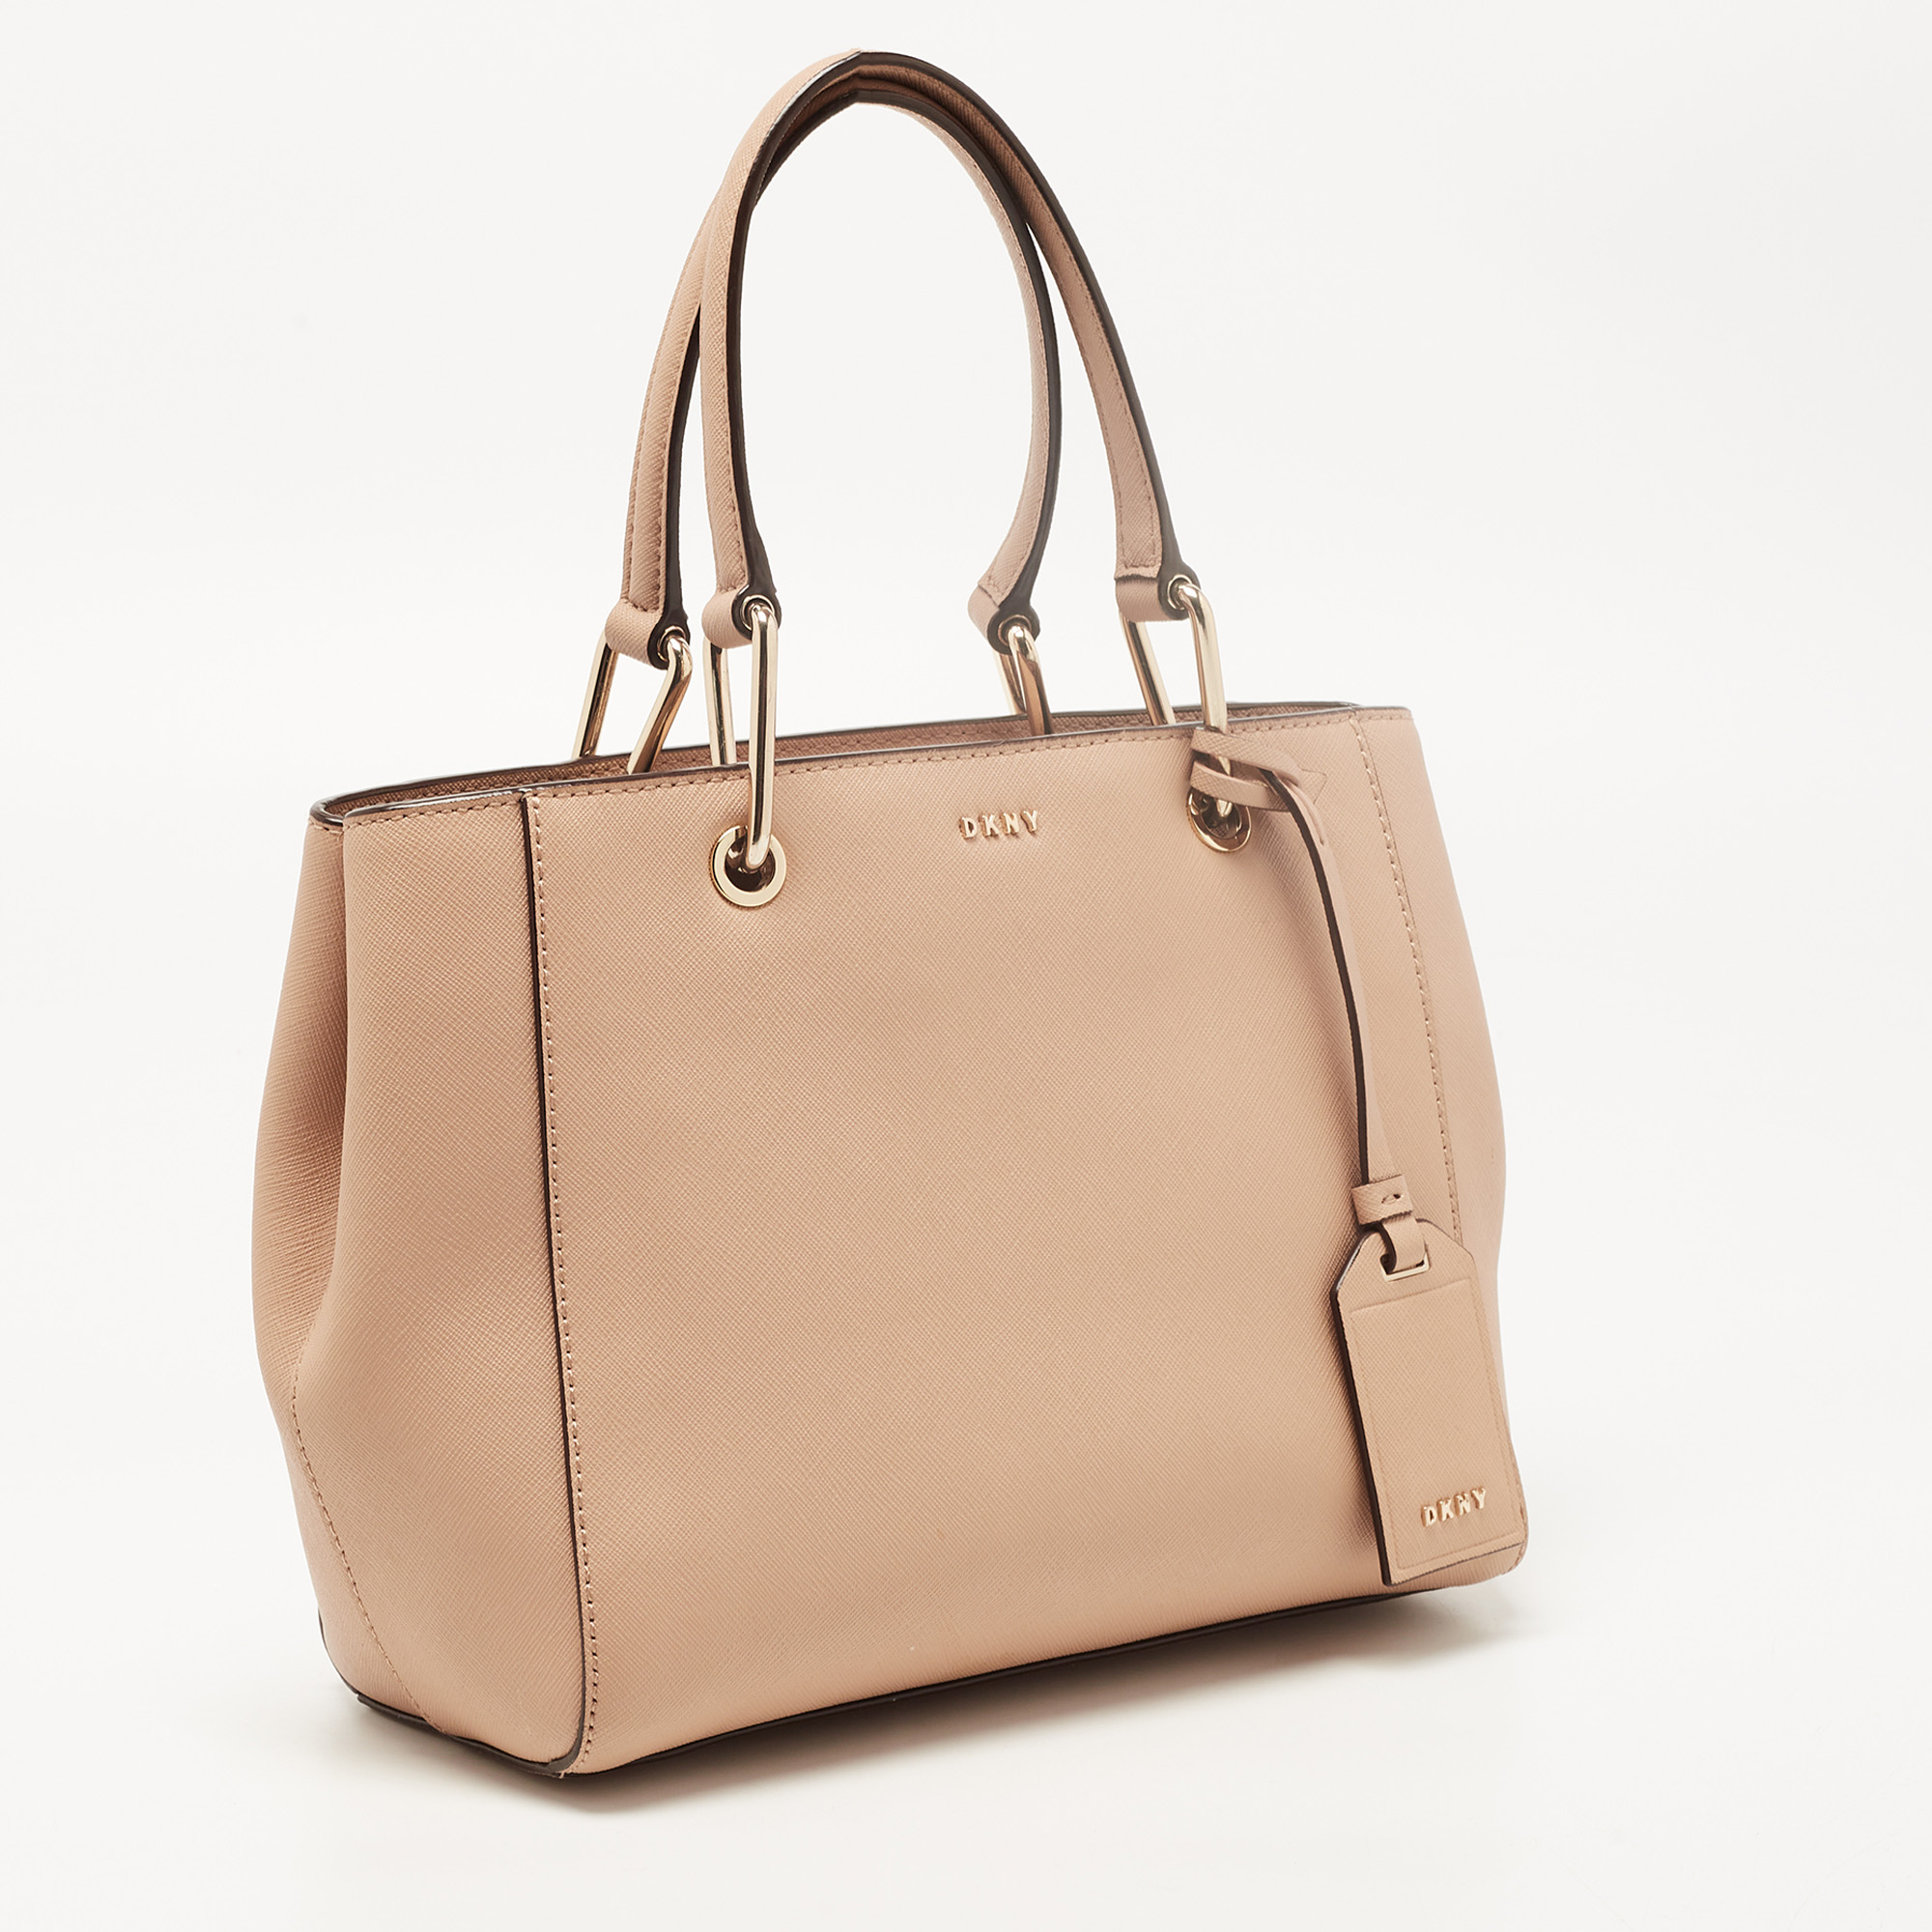 DKNY Beige Leather Tote